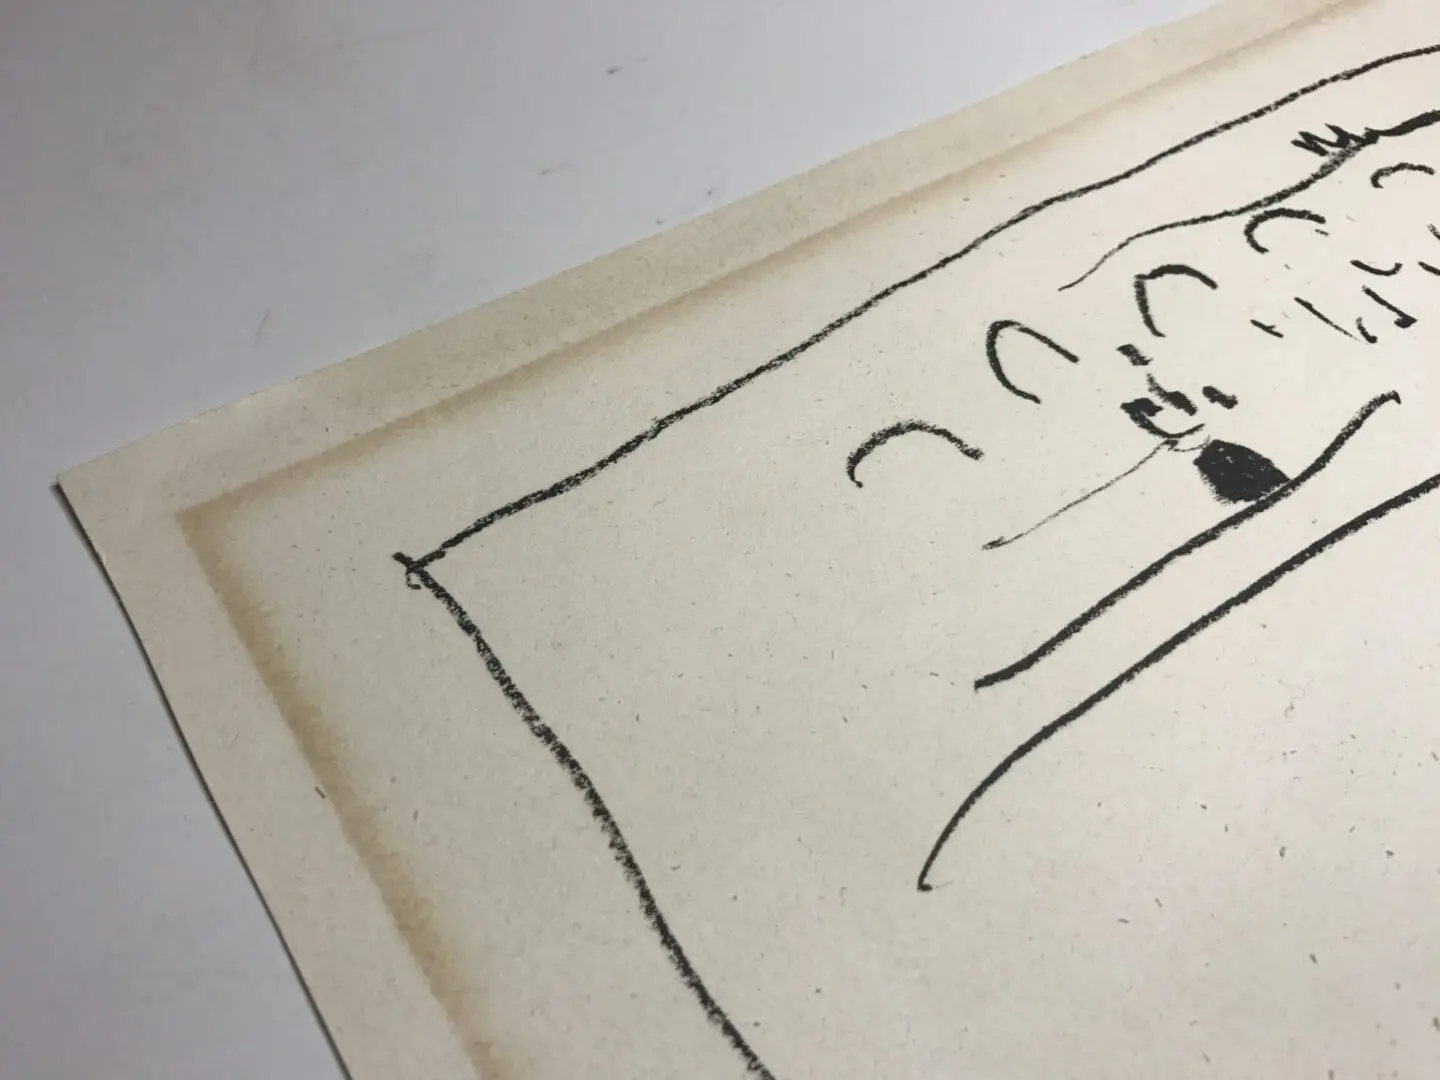 a drawing on the paper before conservation